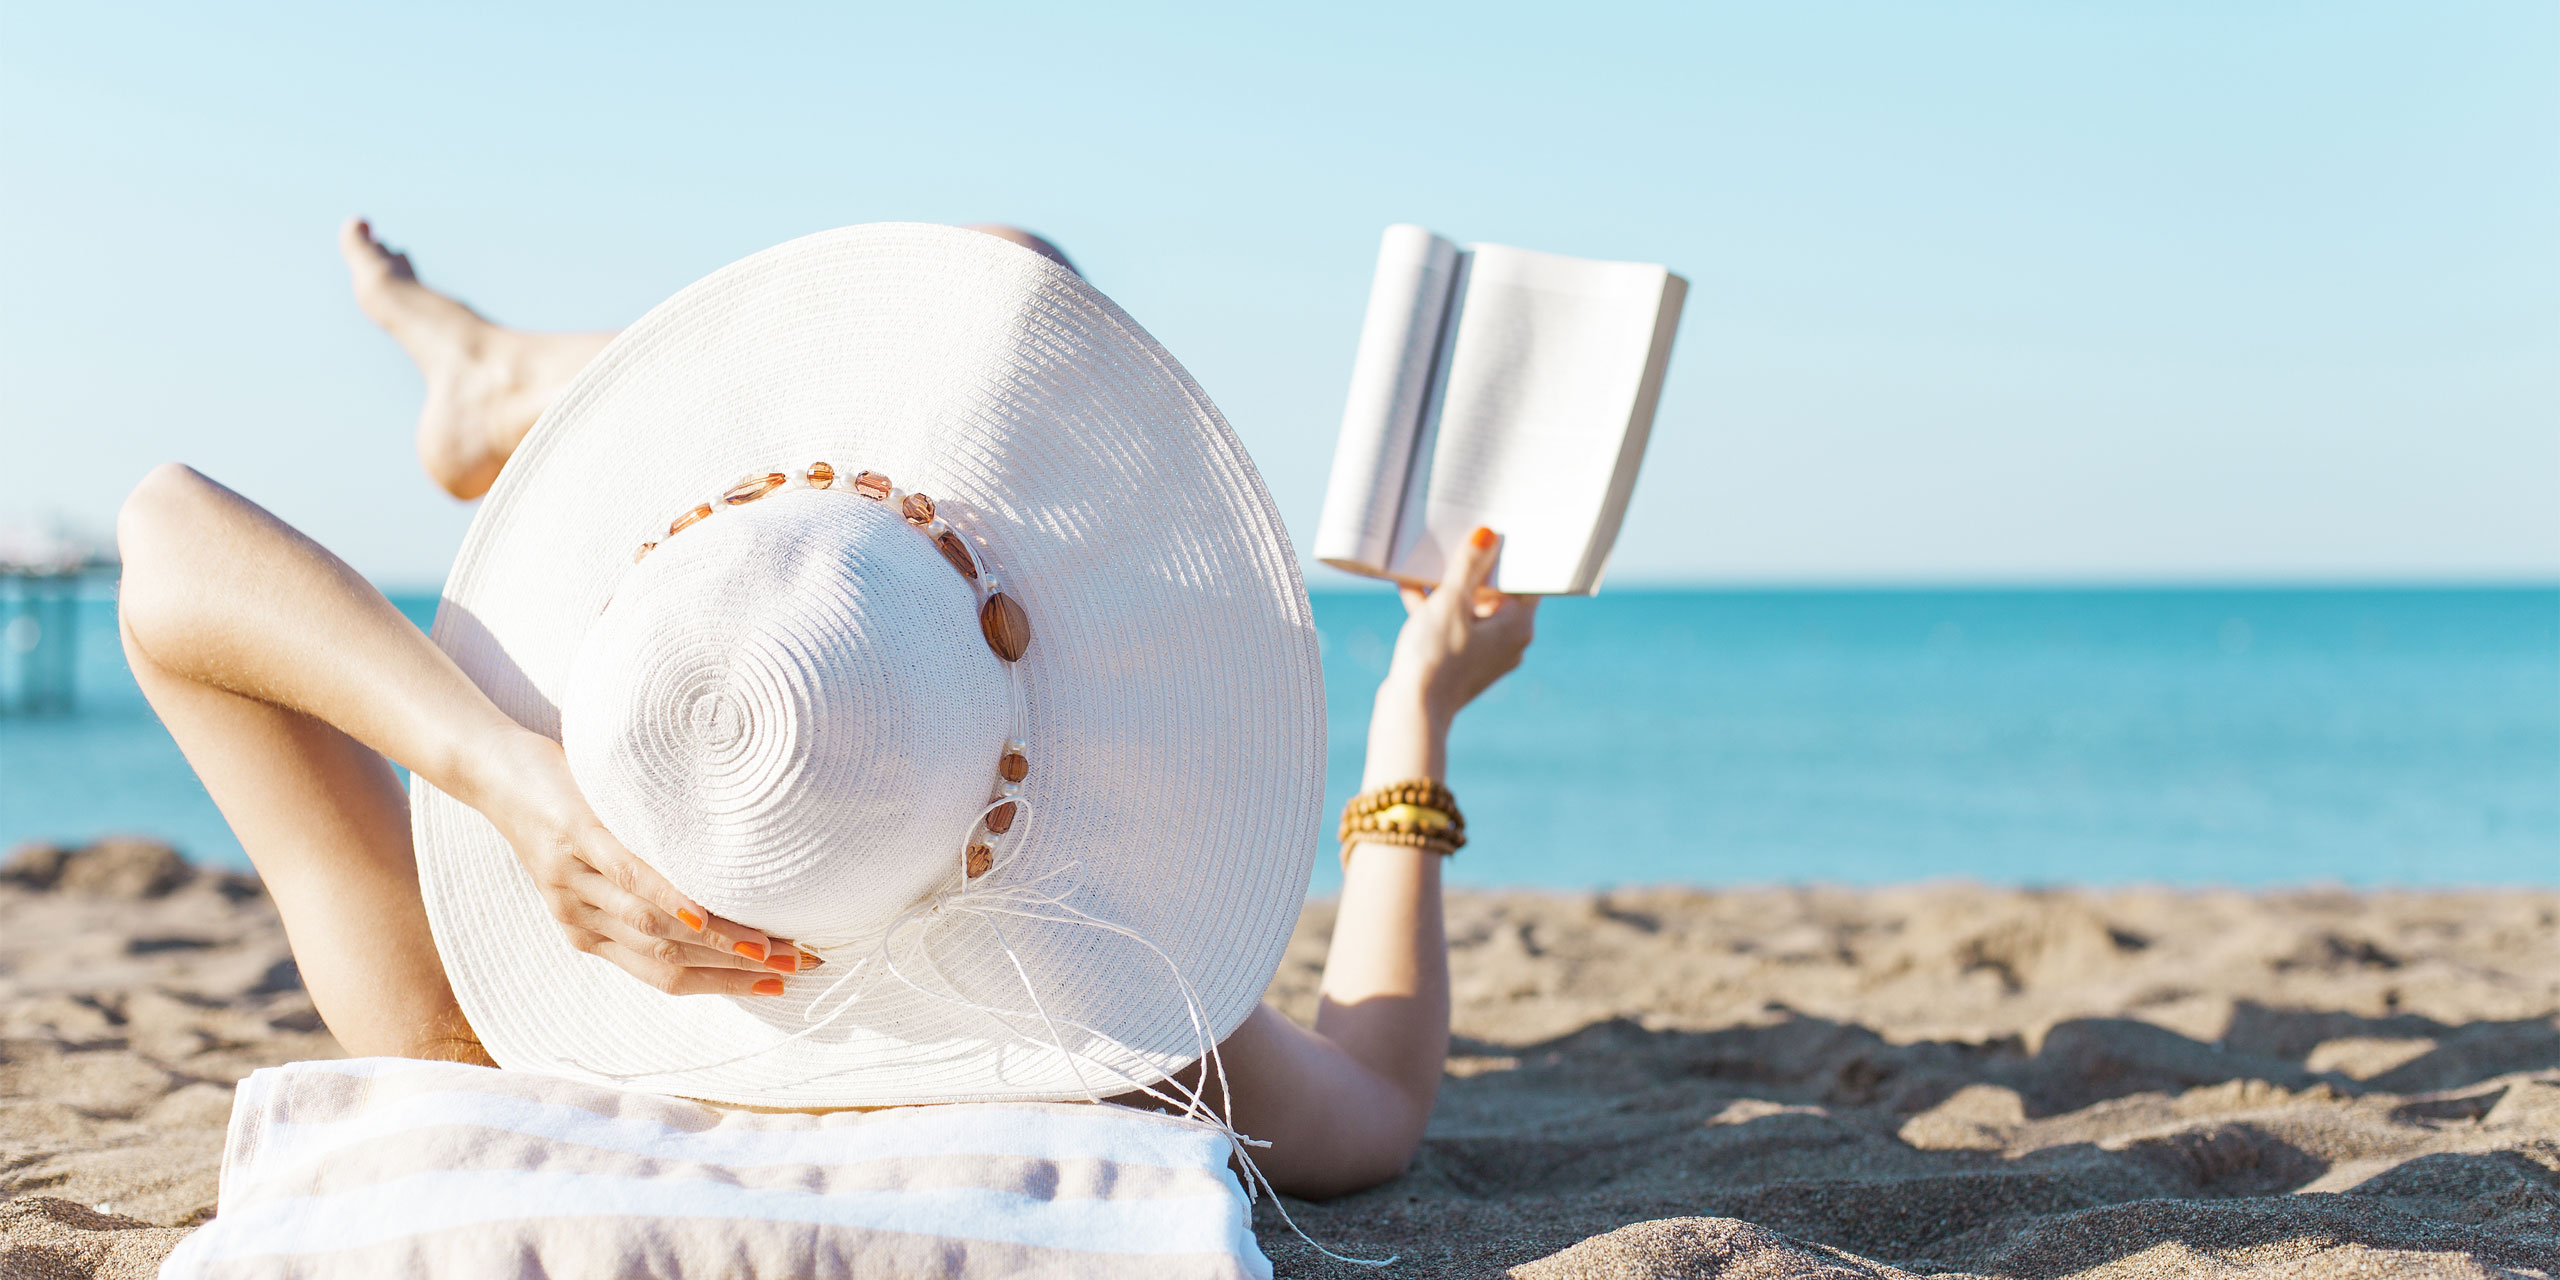 FIVE BOOKS YOU WON’T BE ABLE TO PUT DOWN THIS SUMMER